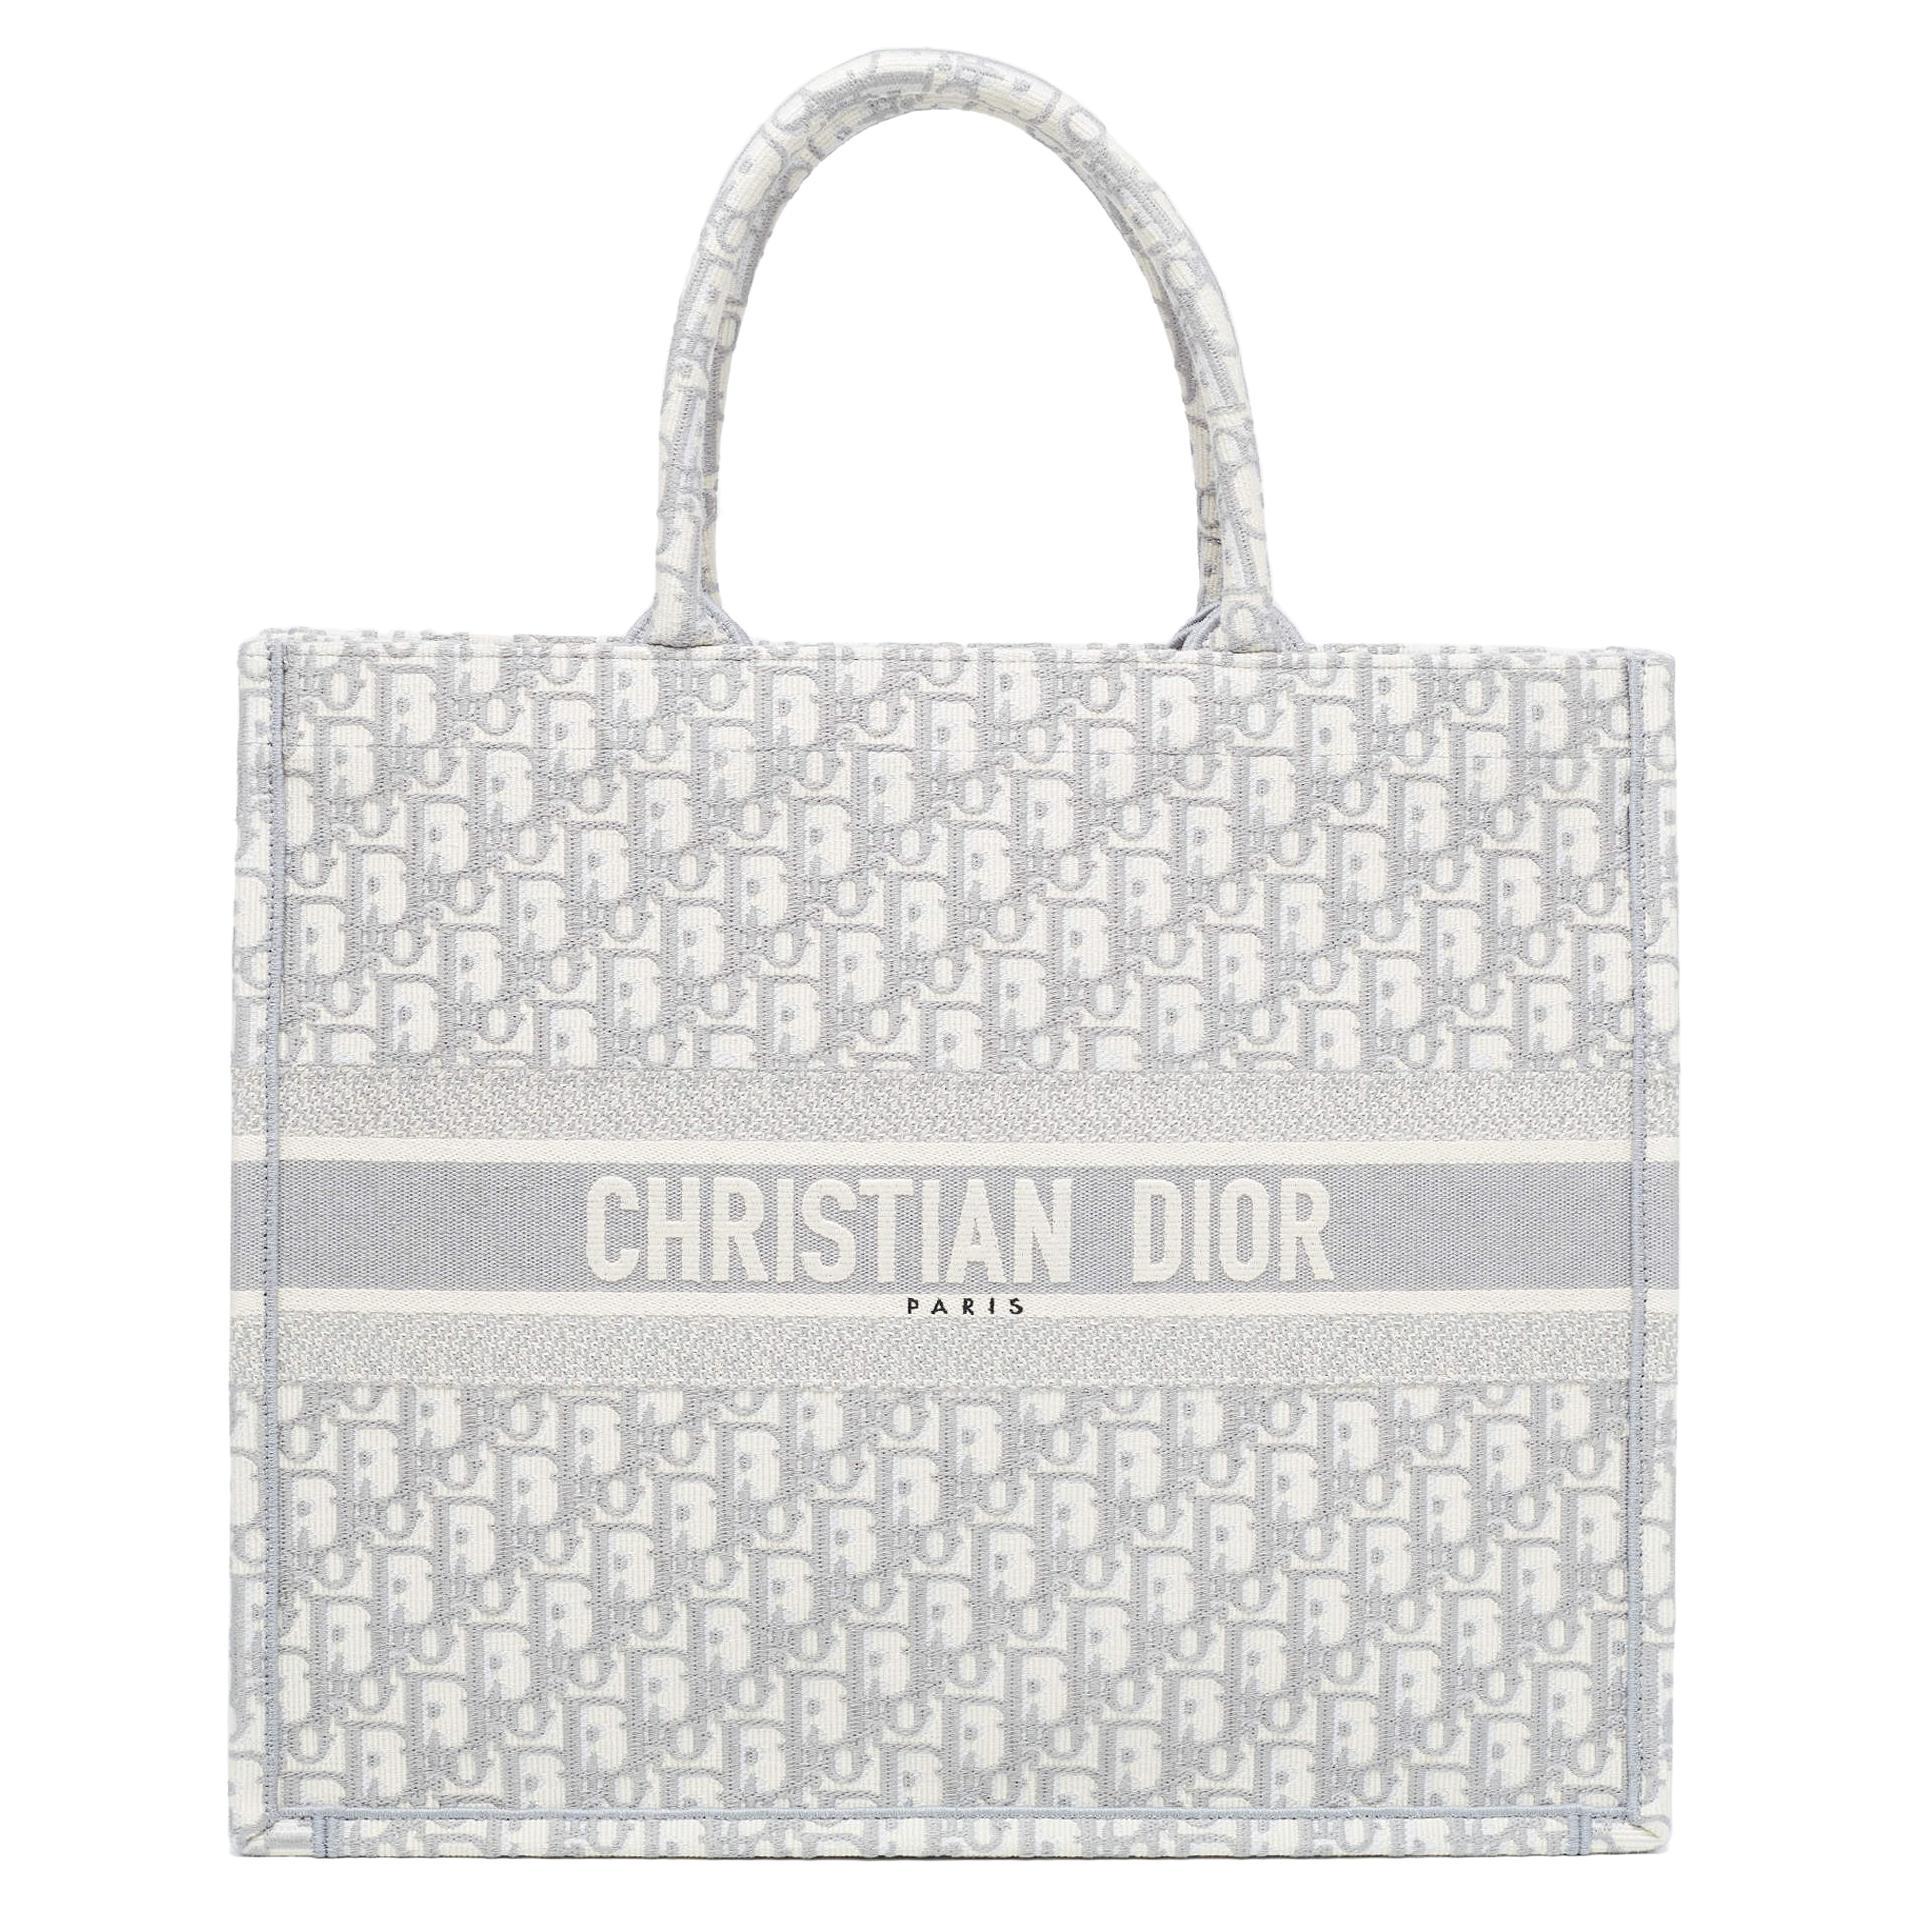 Dior Grey Oblique Embroidered Canvas Large Book Tote